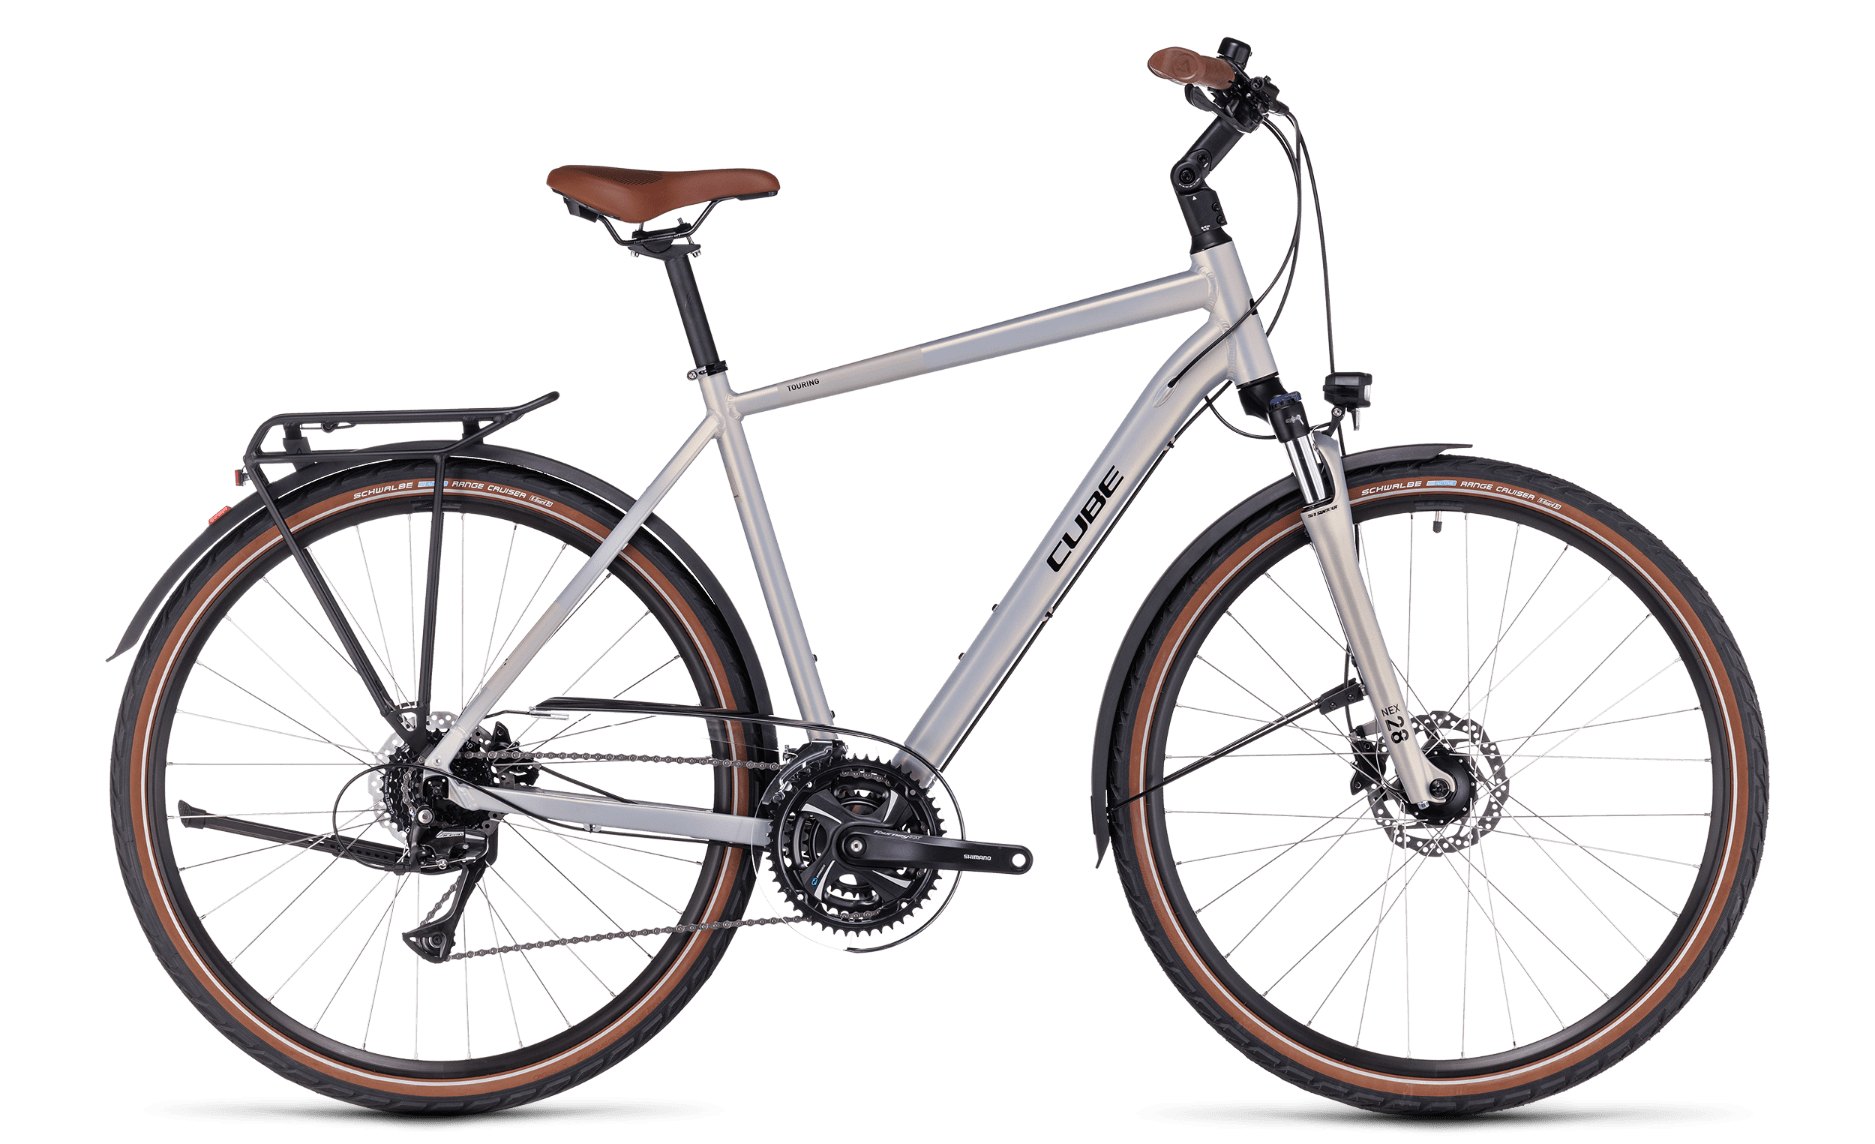 CUBE Touring Pro pearlysilver´n´black (2023) - Multicycle – Dein CUBE  Spezialist